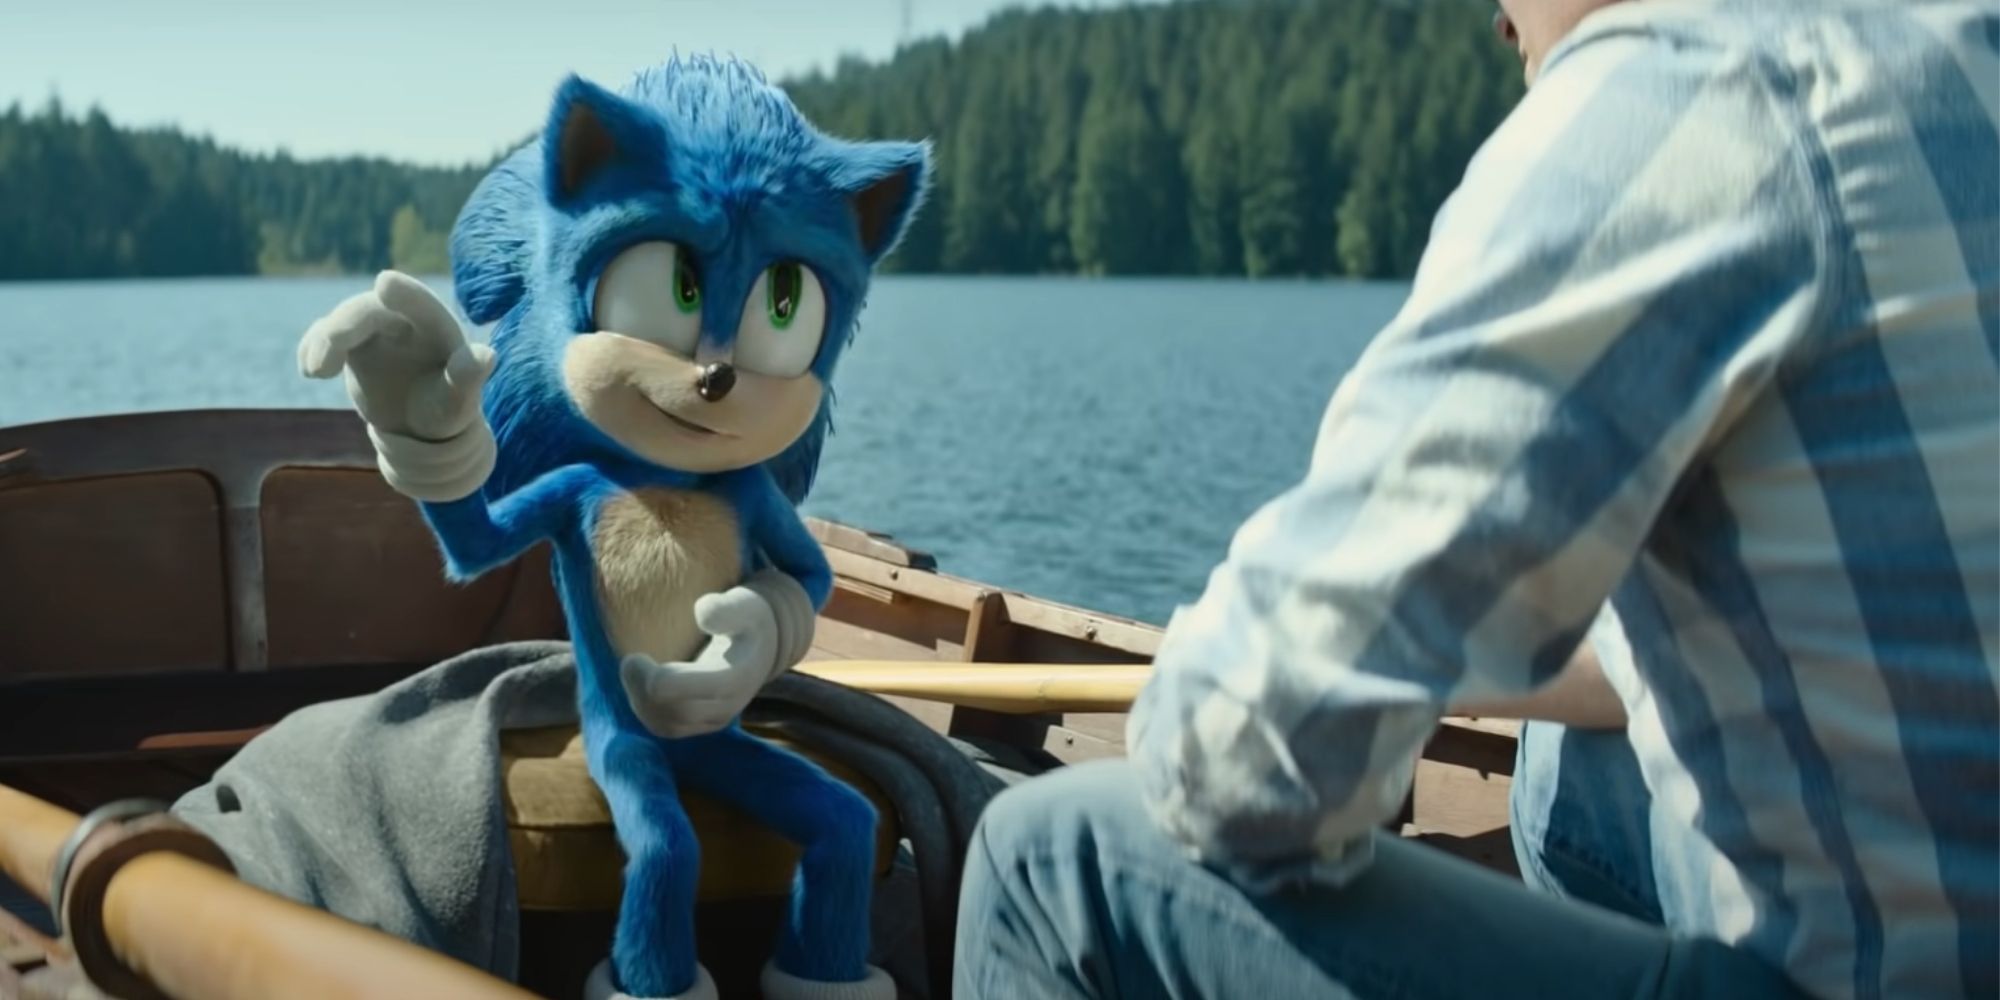 Sonic making gestures with his hands while he speaks with a human standing on a boat.